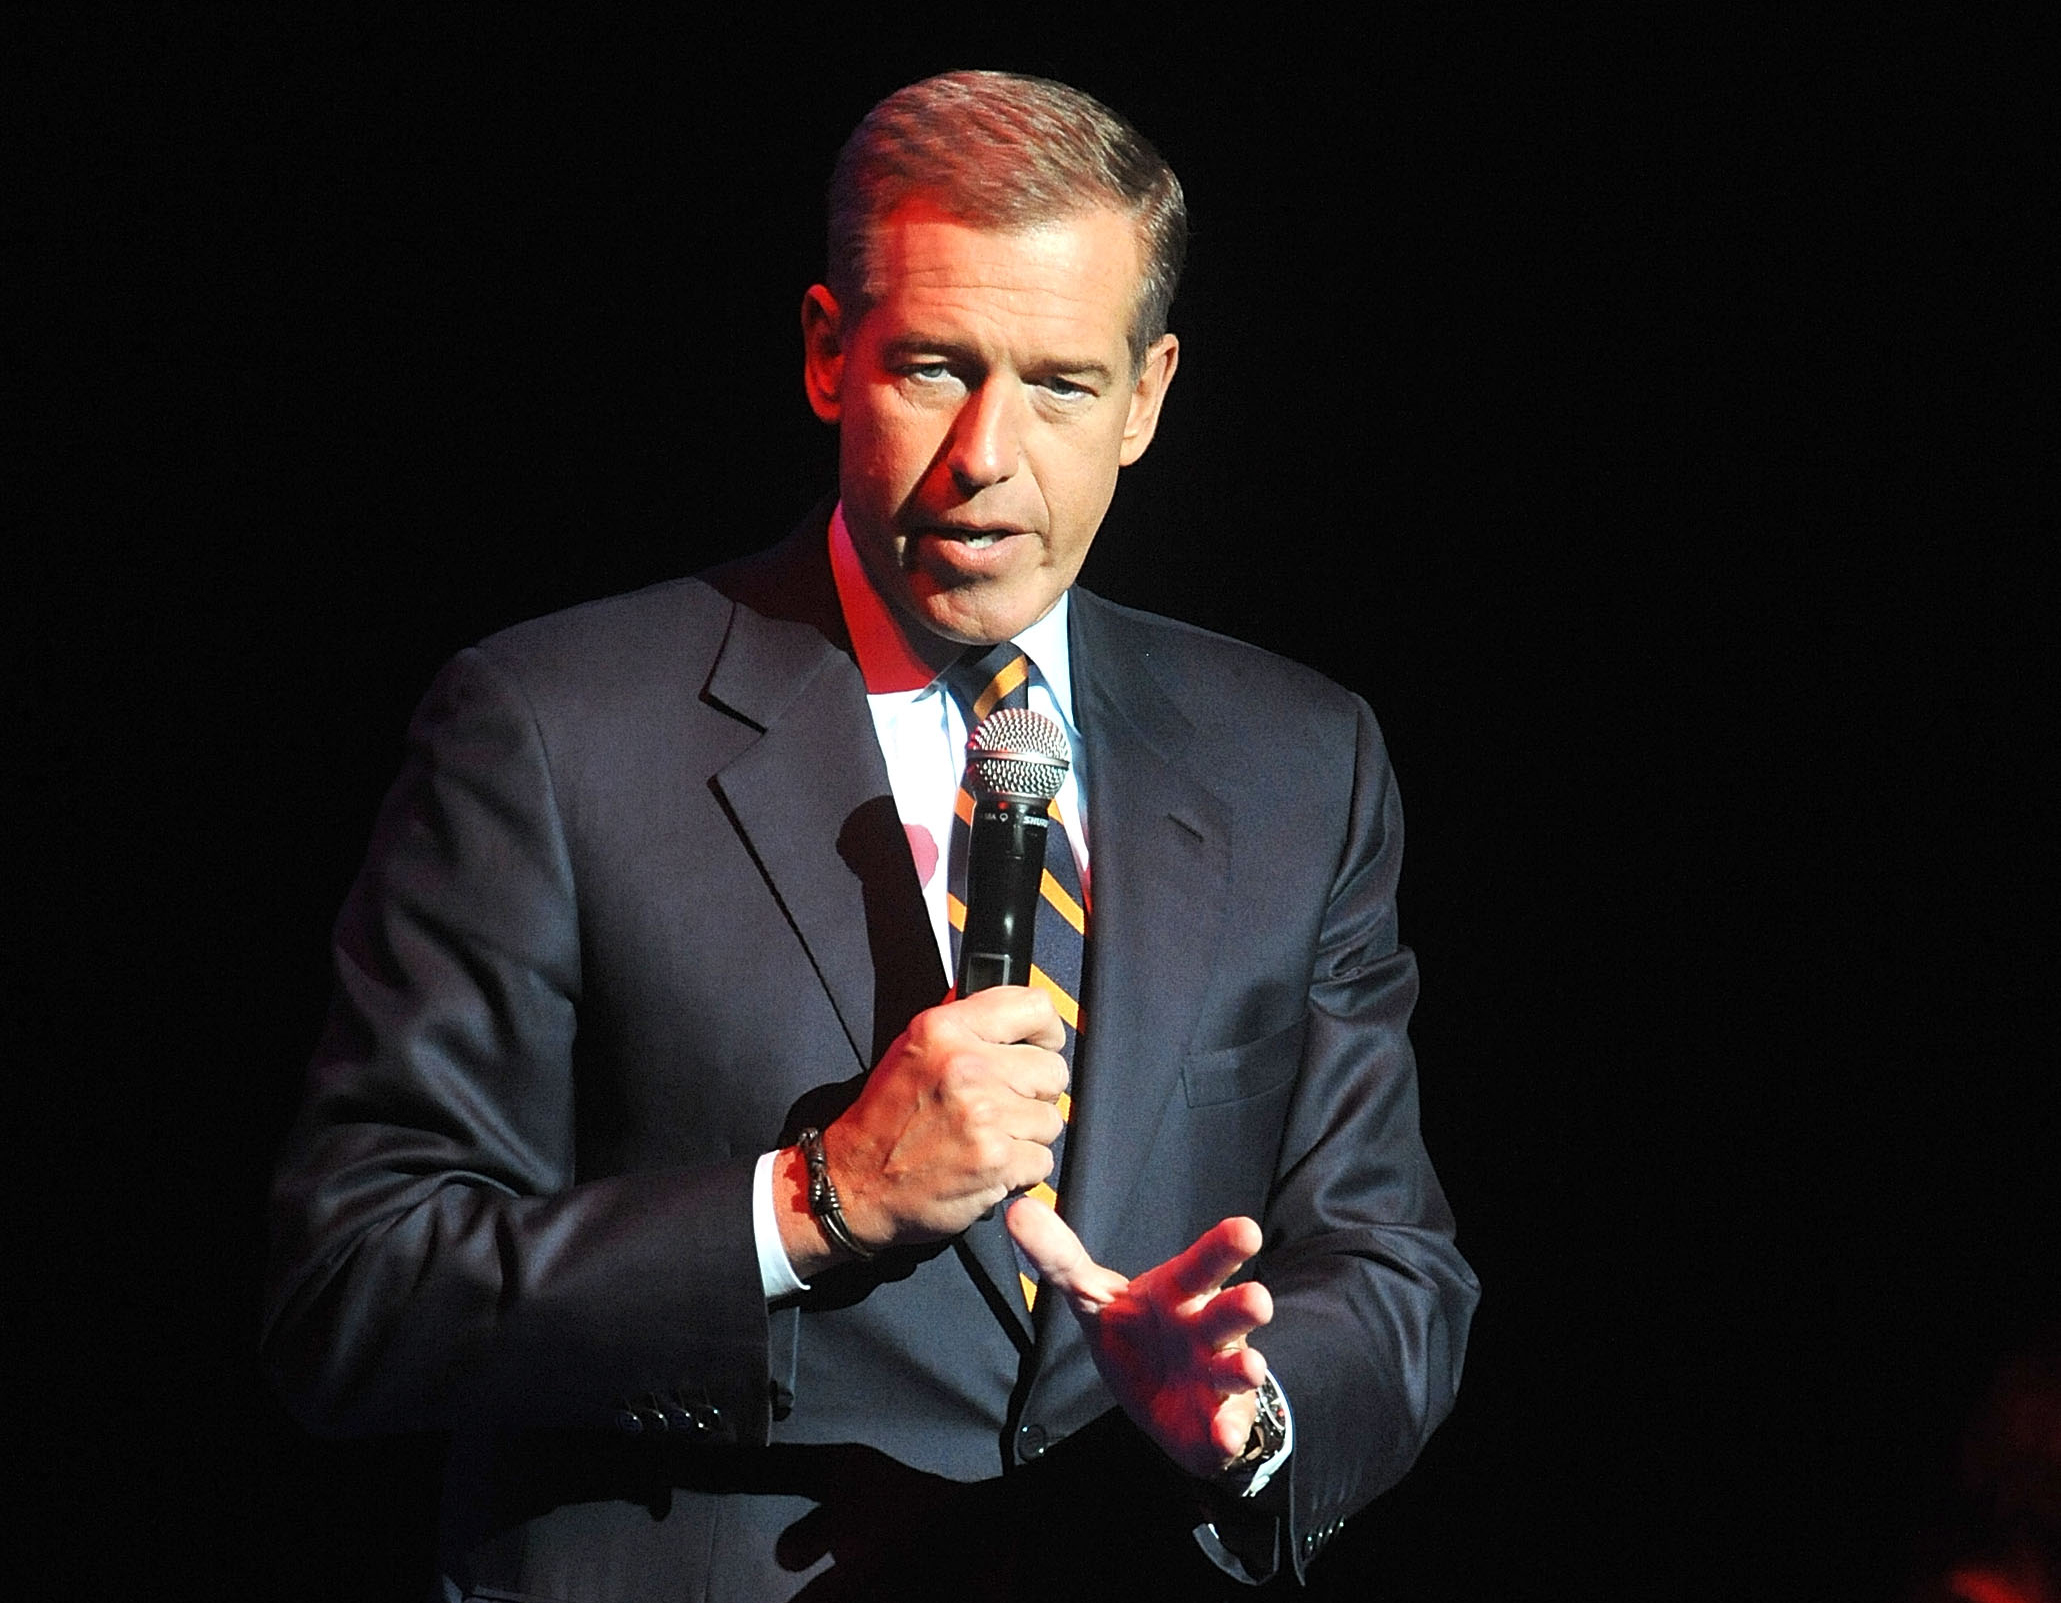 In this Nov. 5, 2014 file photo, Brian Williams speaks at the 8th Annual Stand Up For Heroes, presented by New York Comedy Festival and The Bob Woodruff Foundation in New York. (Photo by Brad Barket/Invision/AP, File)